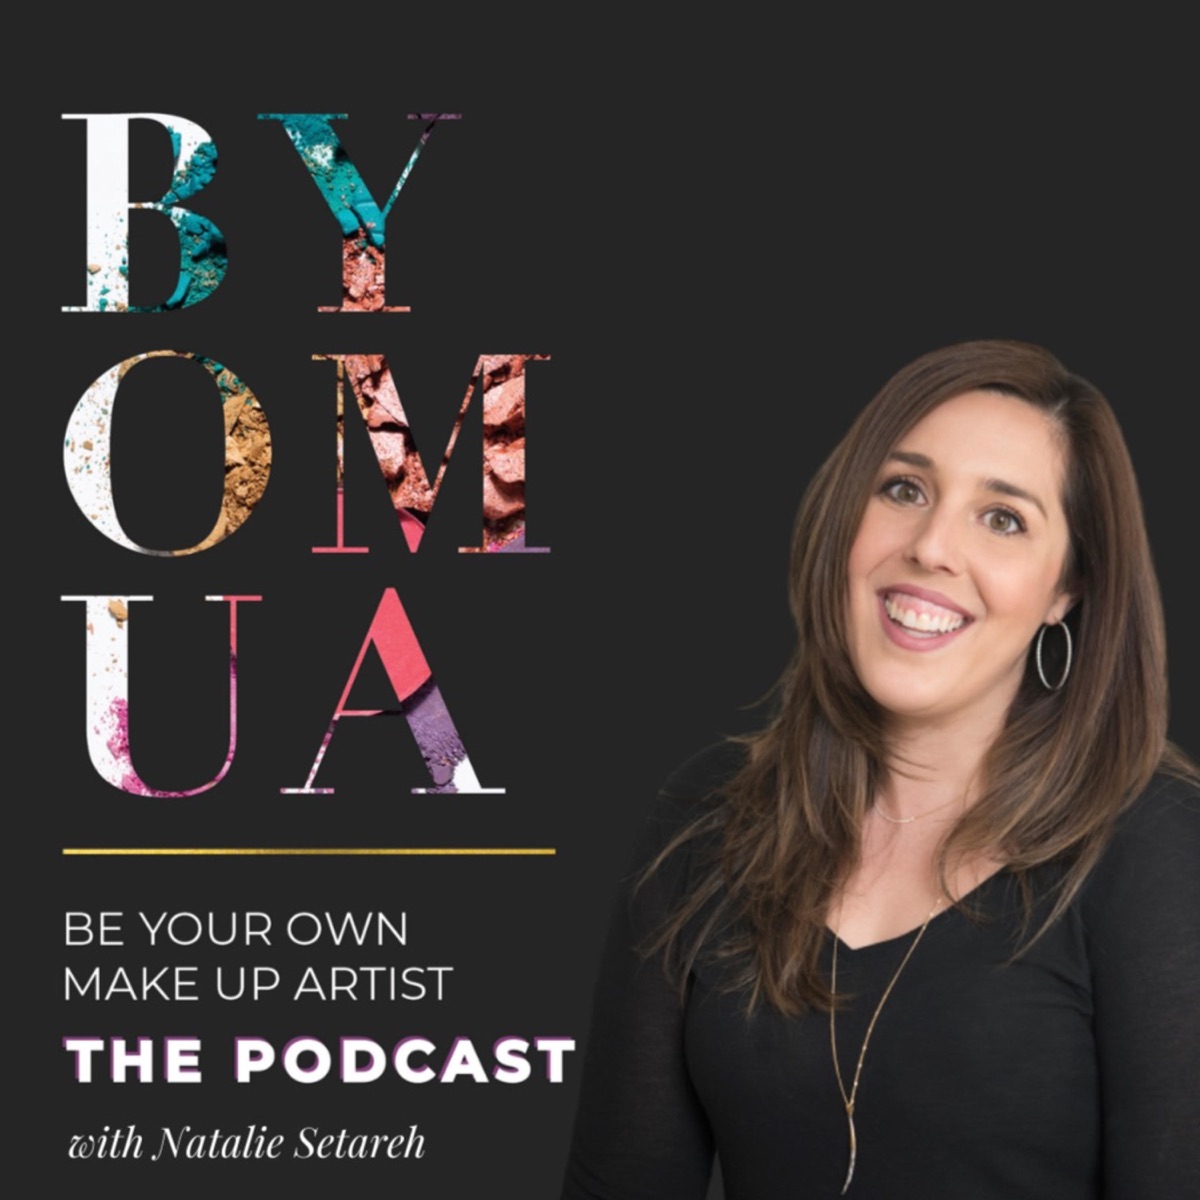 Be Own Makeup with Natalie Setareh - Podcast – Podtail